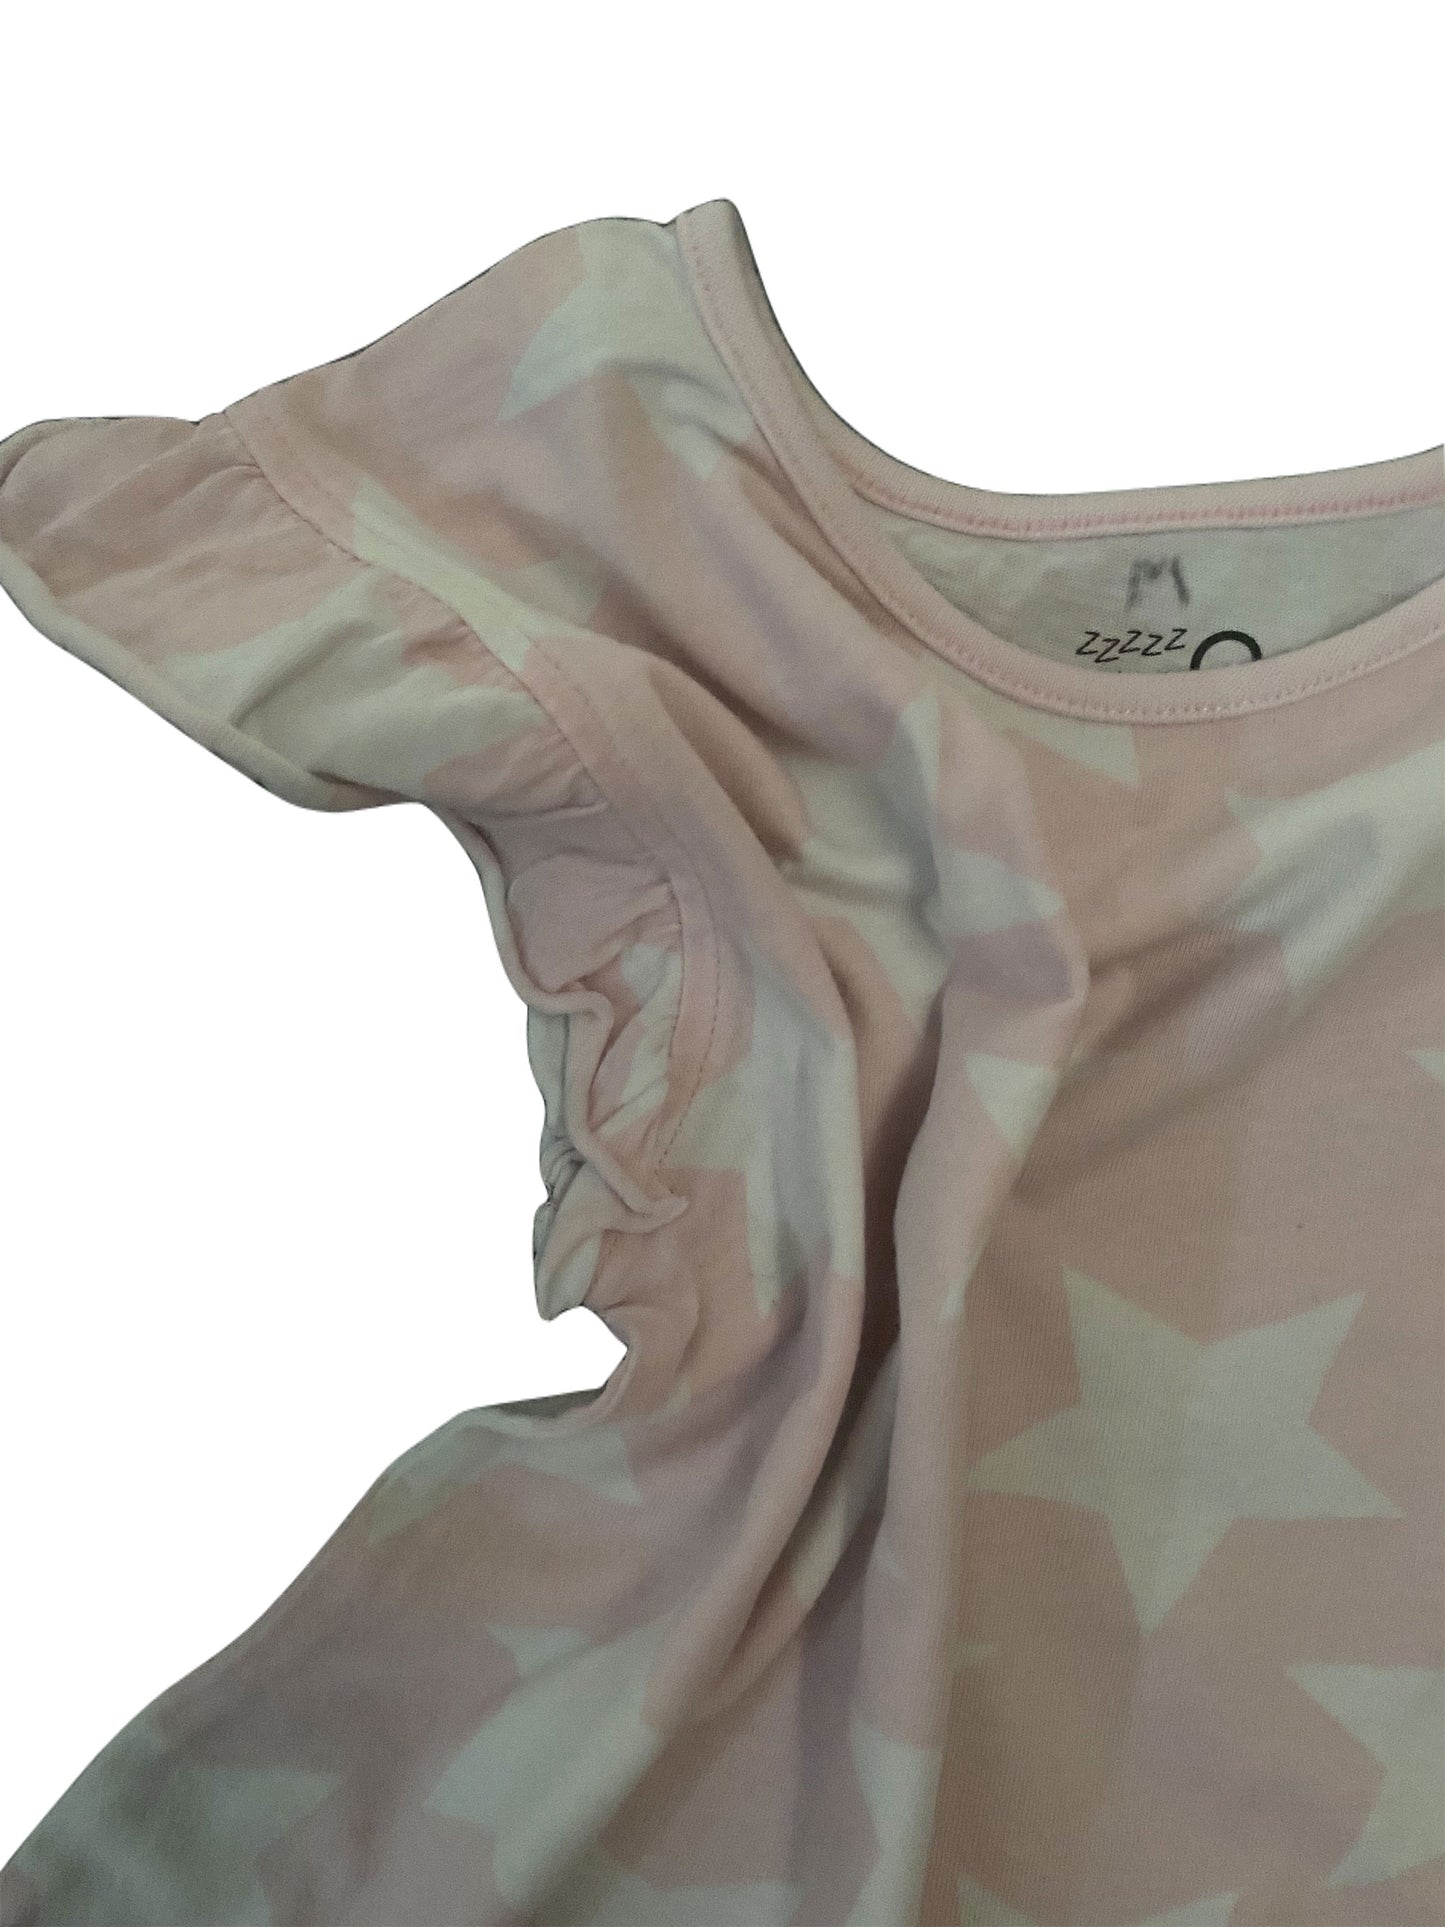 Frilly Sleeved Pink/White Stars Tee